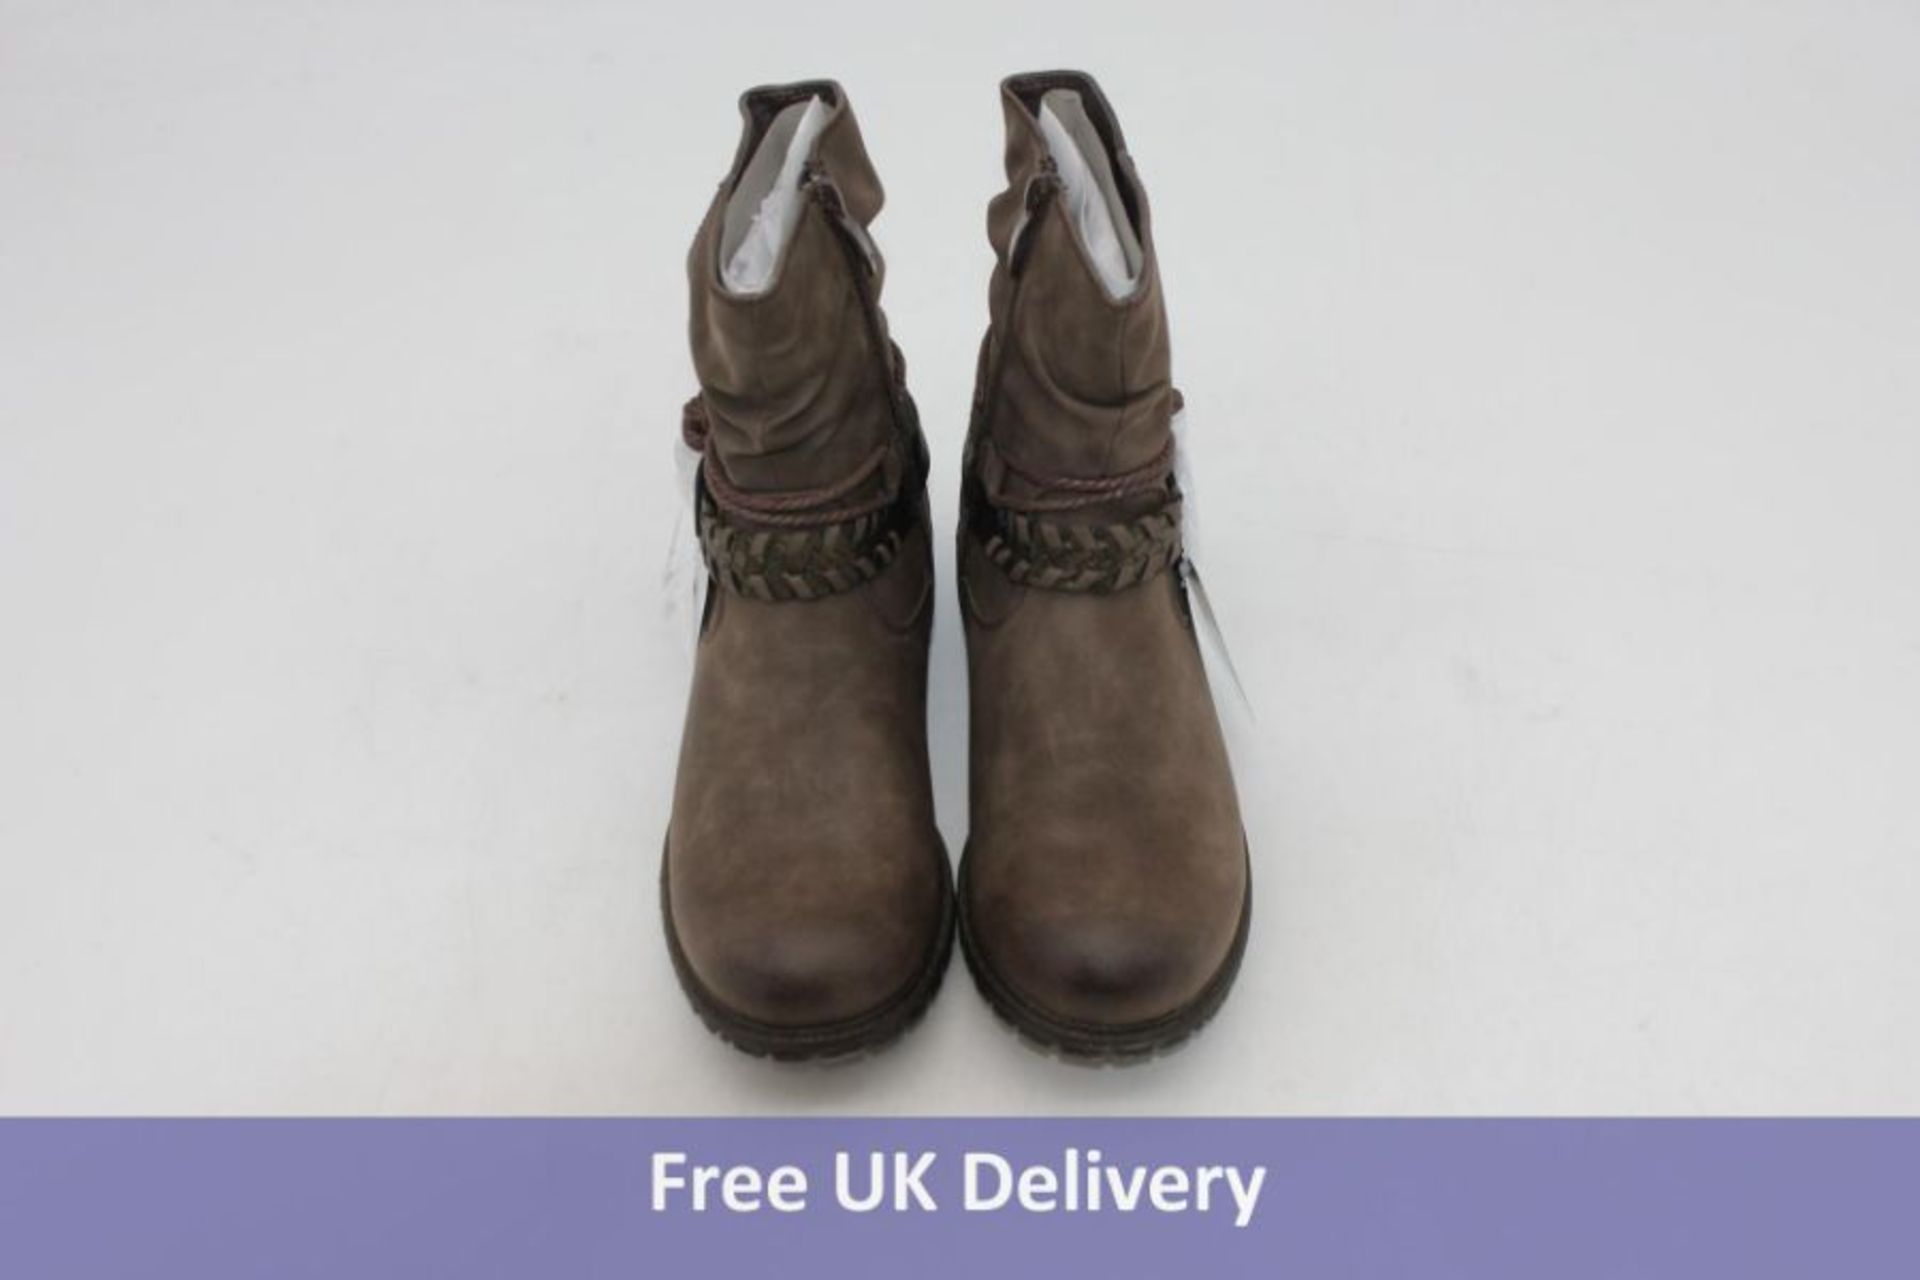 Pavers Women's Wool Boots, Brown, UK Size 6